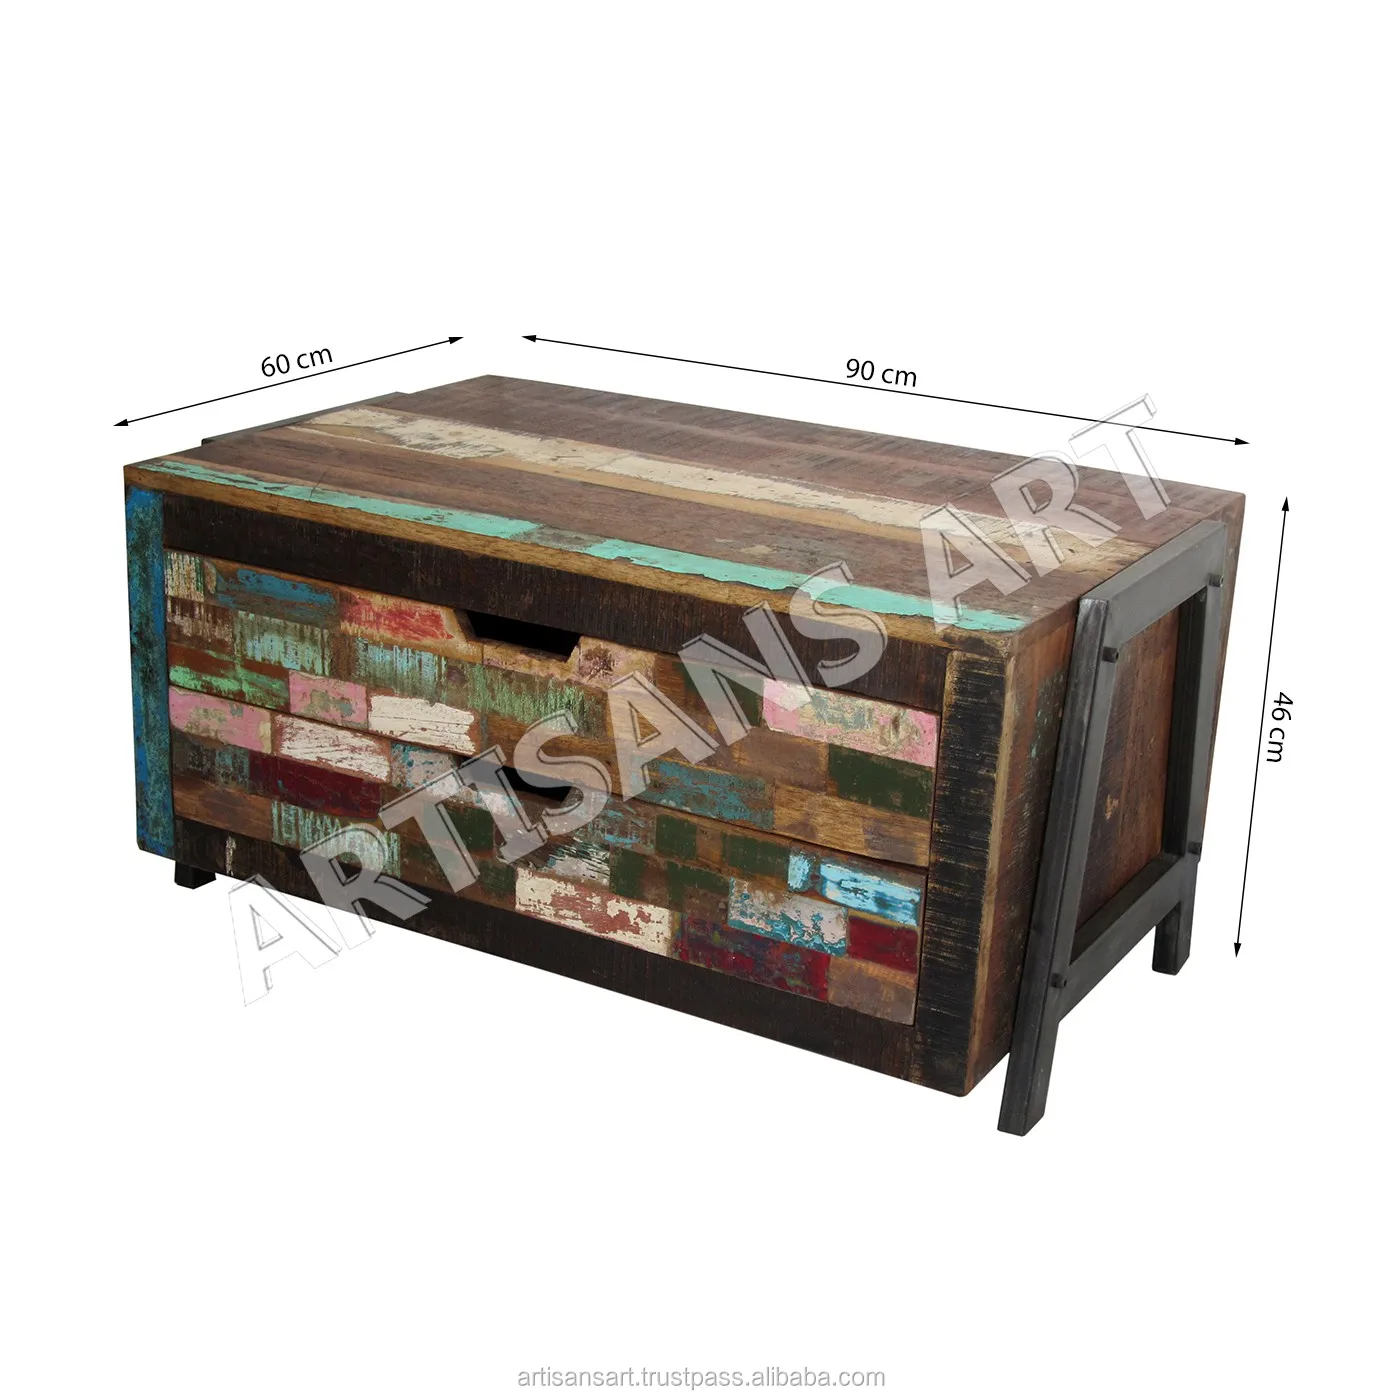 Antique Reclamed Wood 2 Drawer Coffee Table Vintage Recycle Wood Storage Coffee Table Multifunctional Design Furniture Buy Distressed Wood Coffee Table Reclaimed Wood Coffee Table With Drawers Wood Folding Coffee Table Product On Alibaba Com